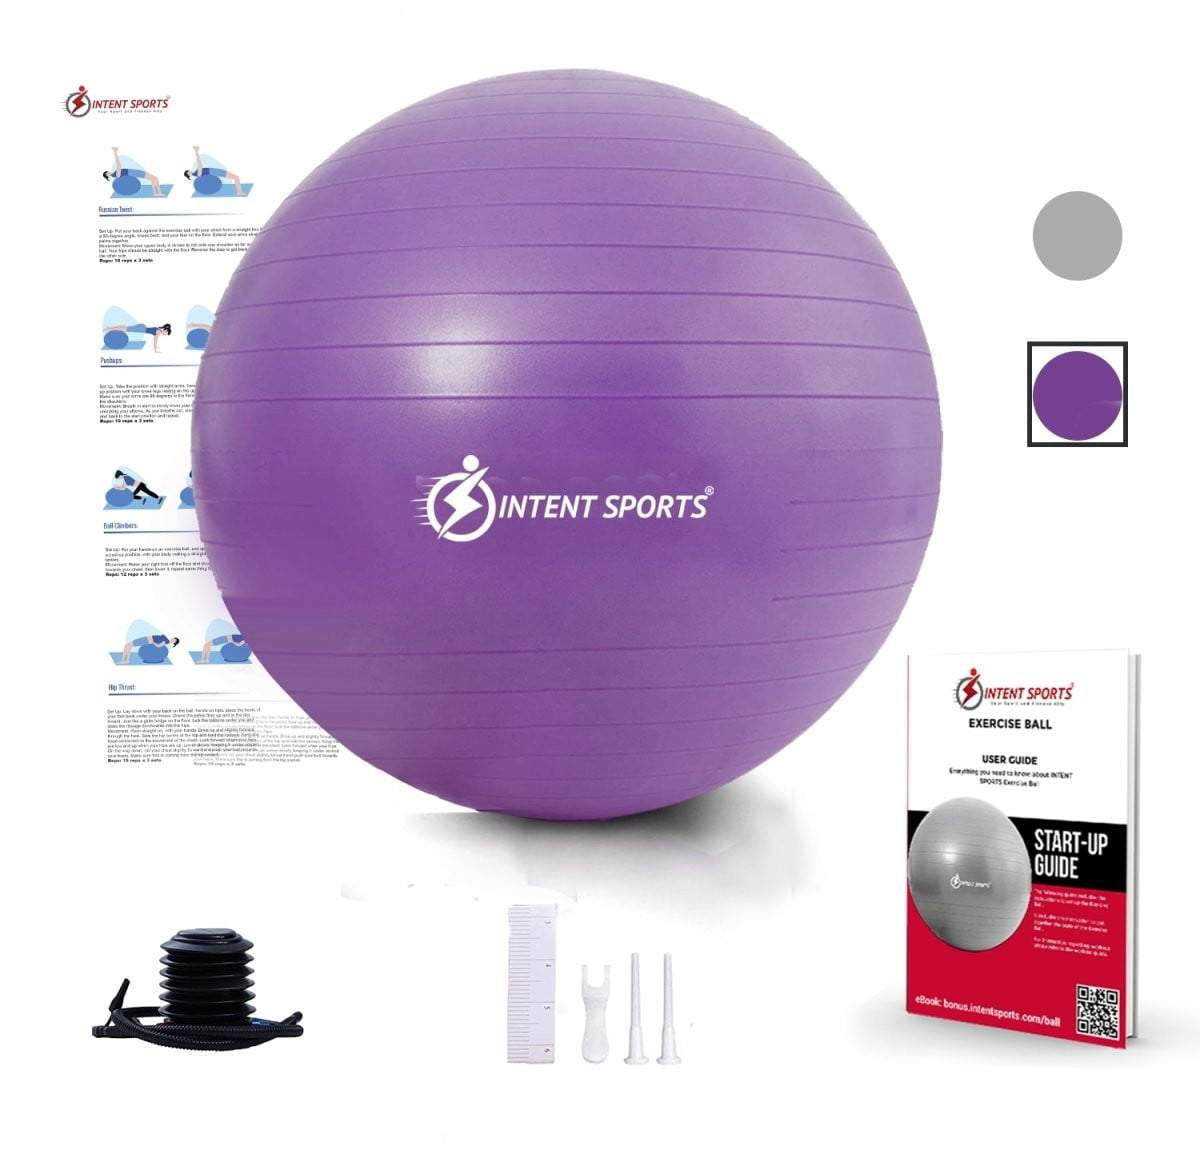 Exercise Ball Chair with Inflation Pump - Intent Sports